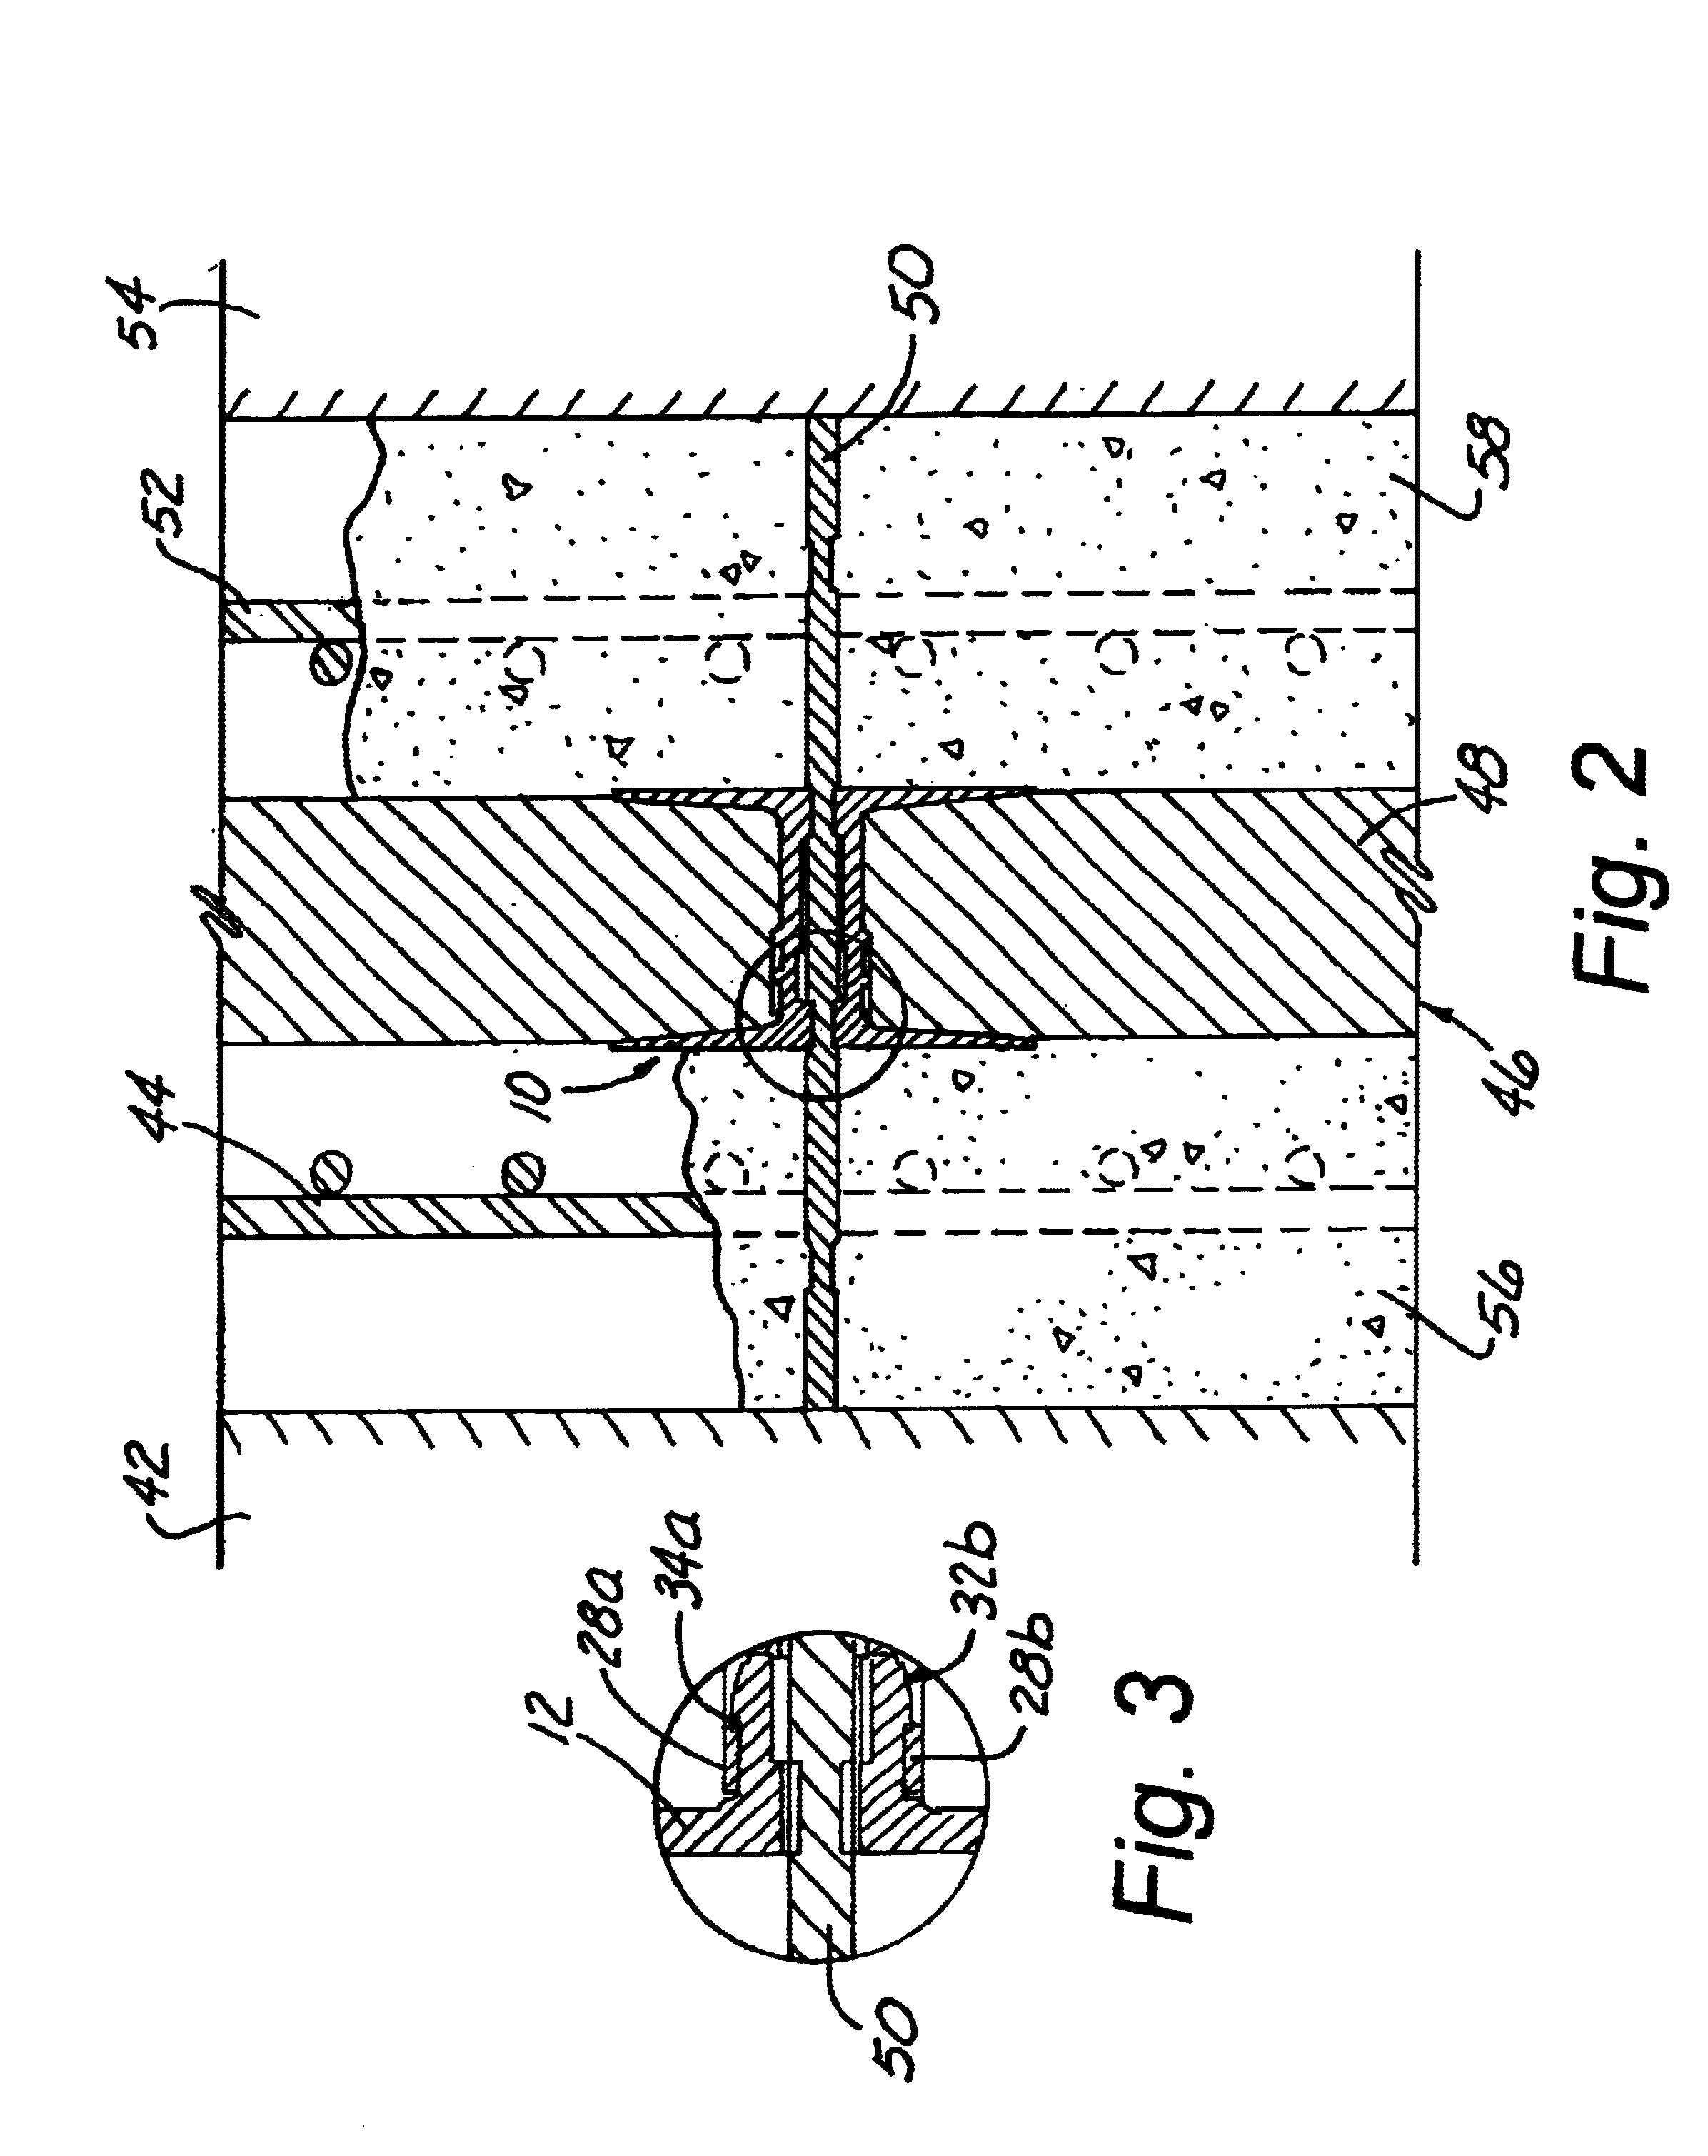 Connector assembly for insulated concrete walls